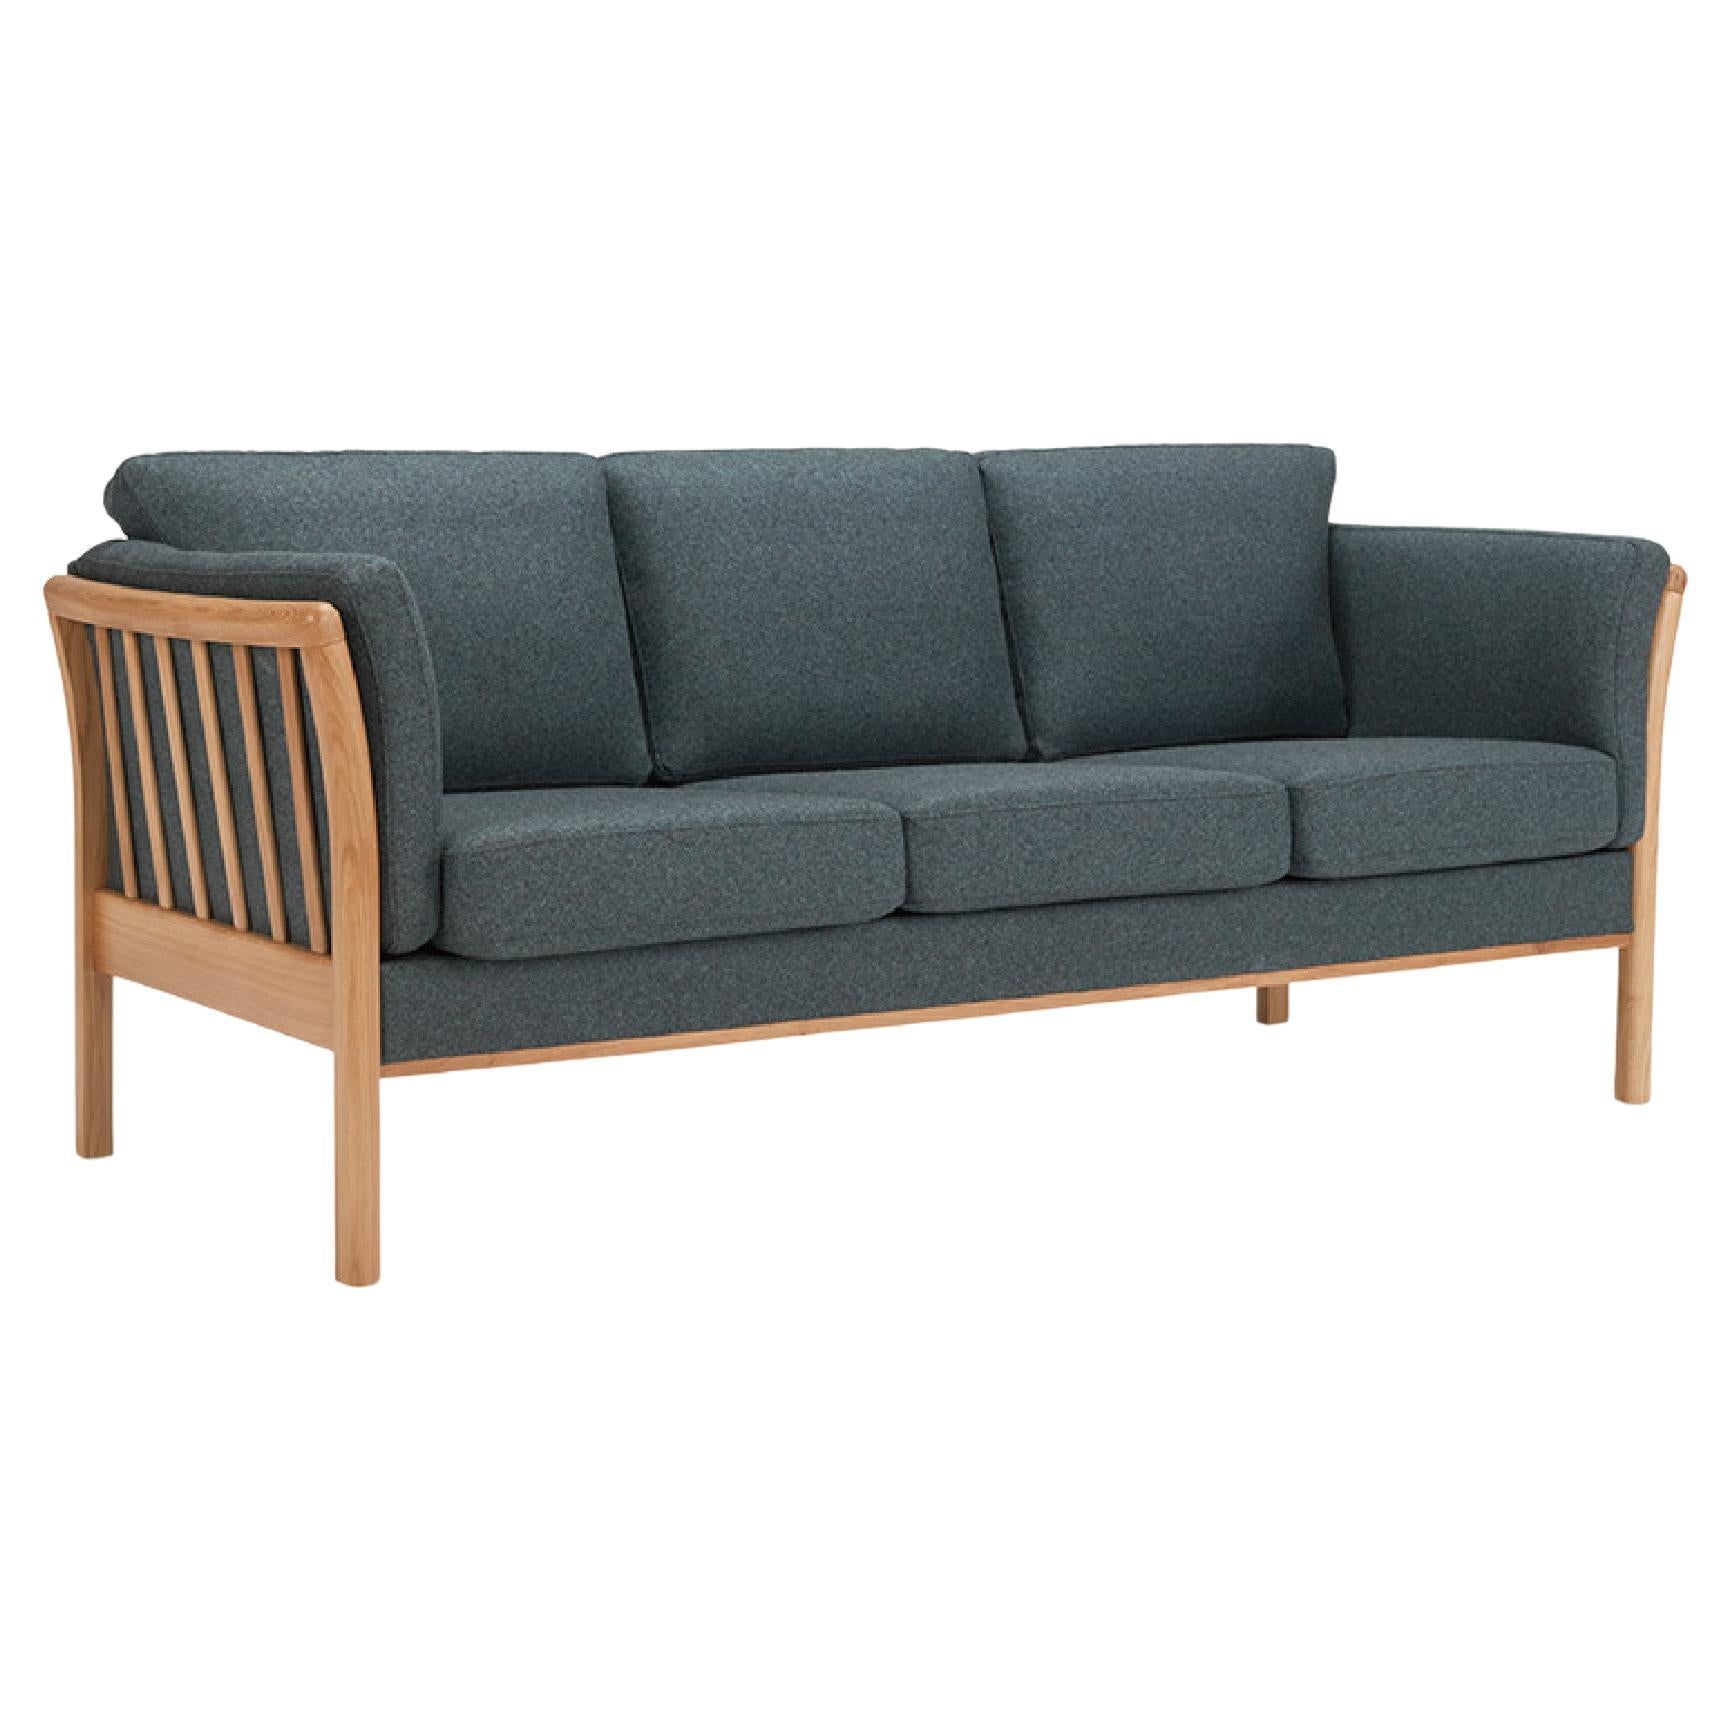 Hayche Oscar 3 Seater Sofa - Blue, UK, Made to Order For Sale